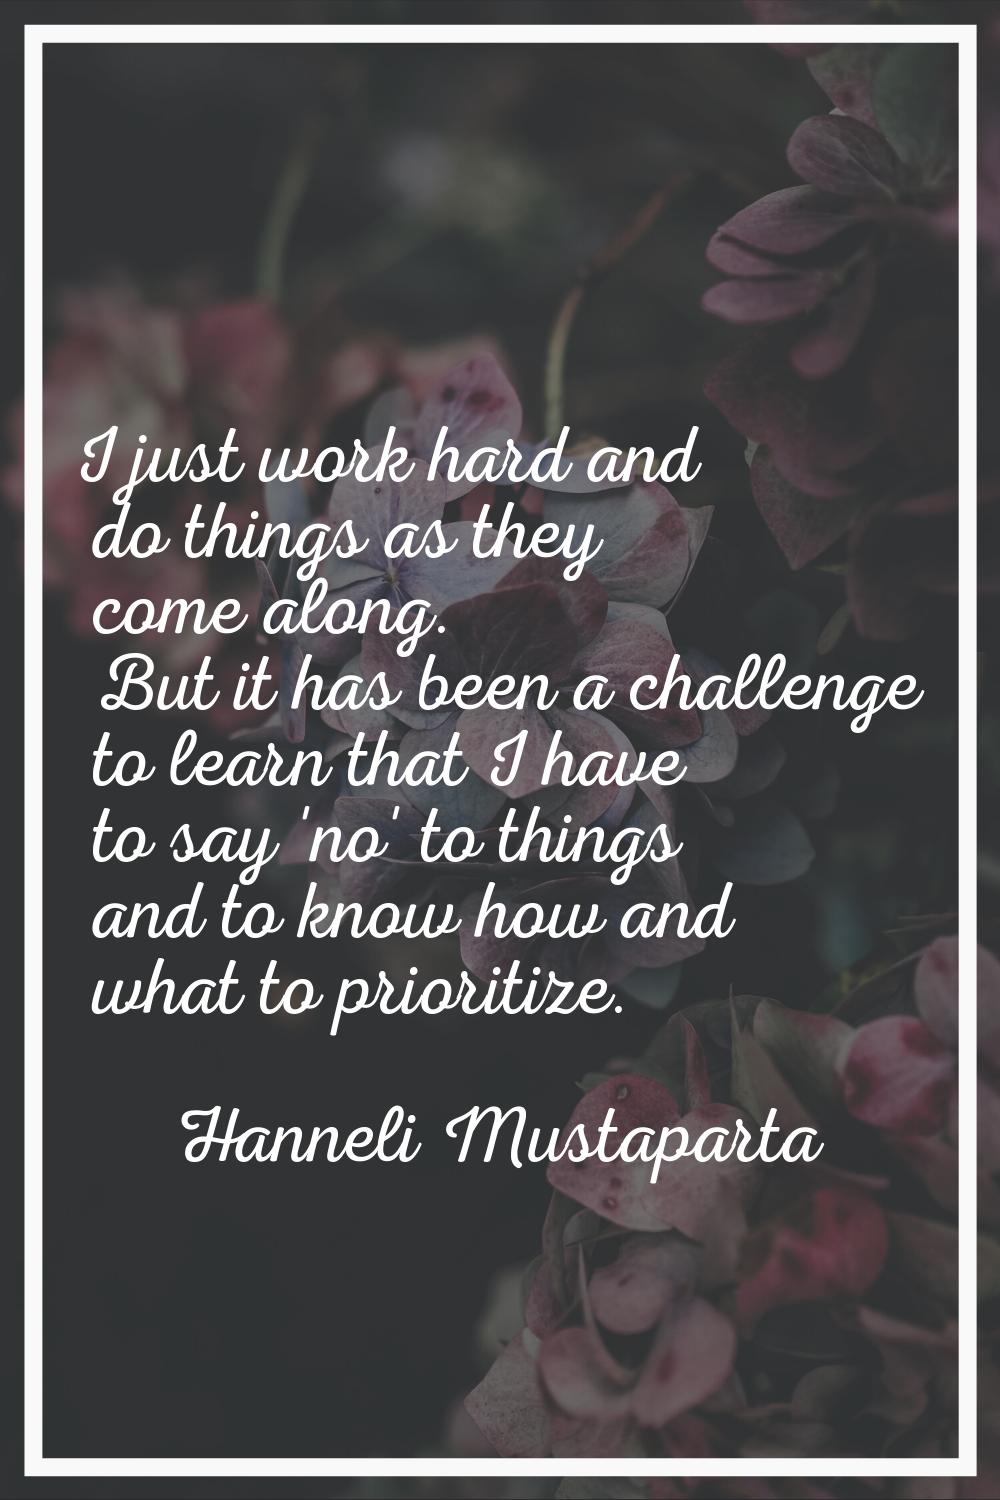 I just work hard and do things as they come along. But it has been a challenge to learn that I have